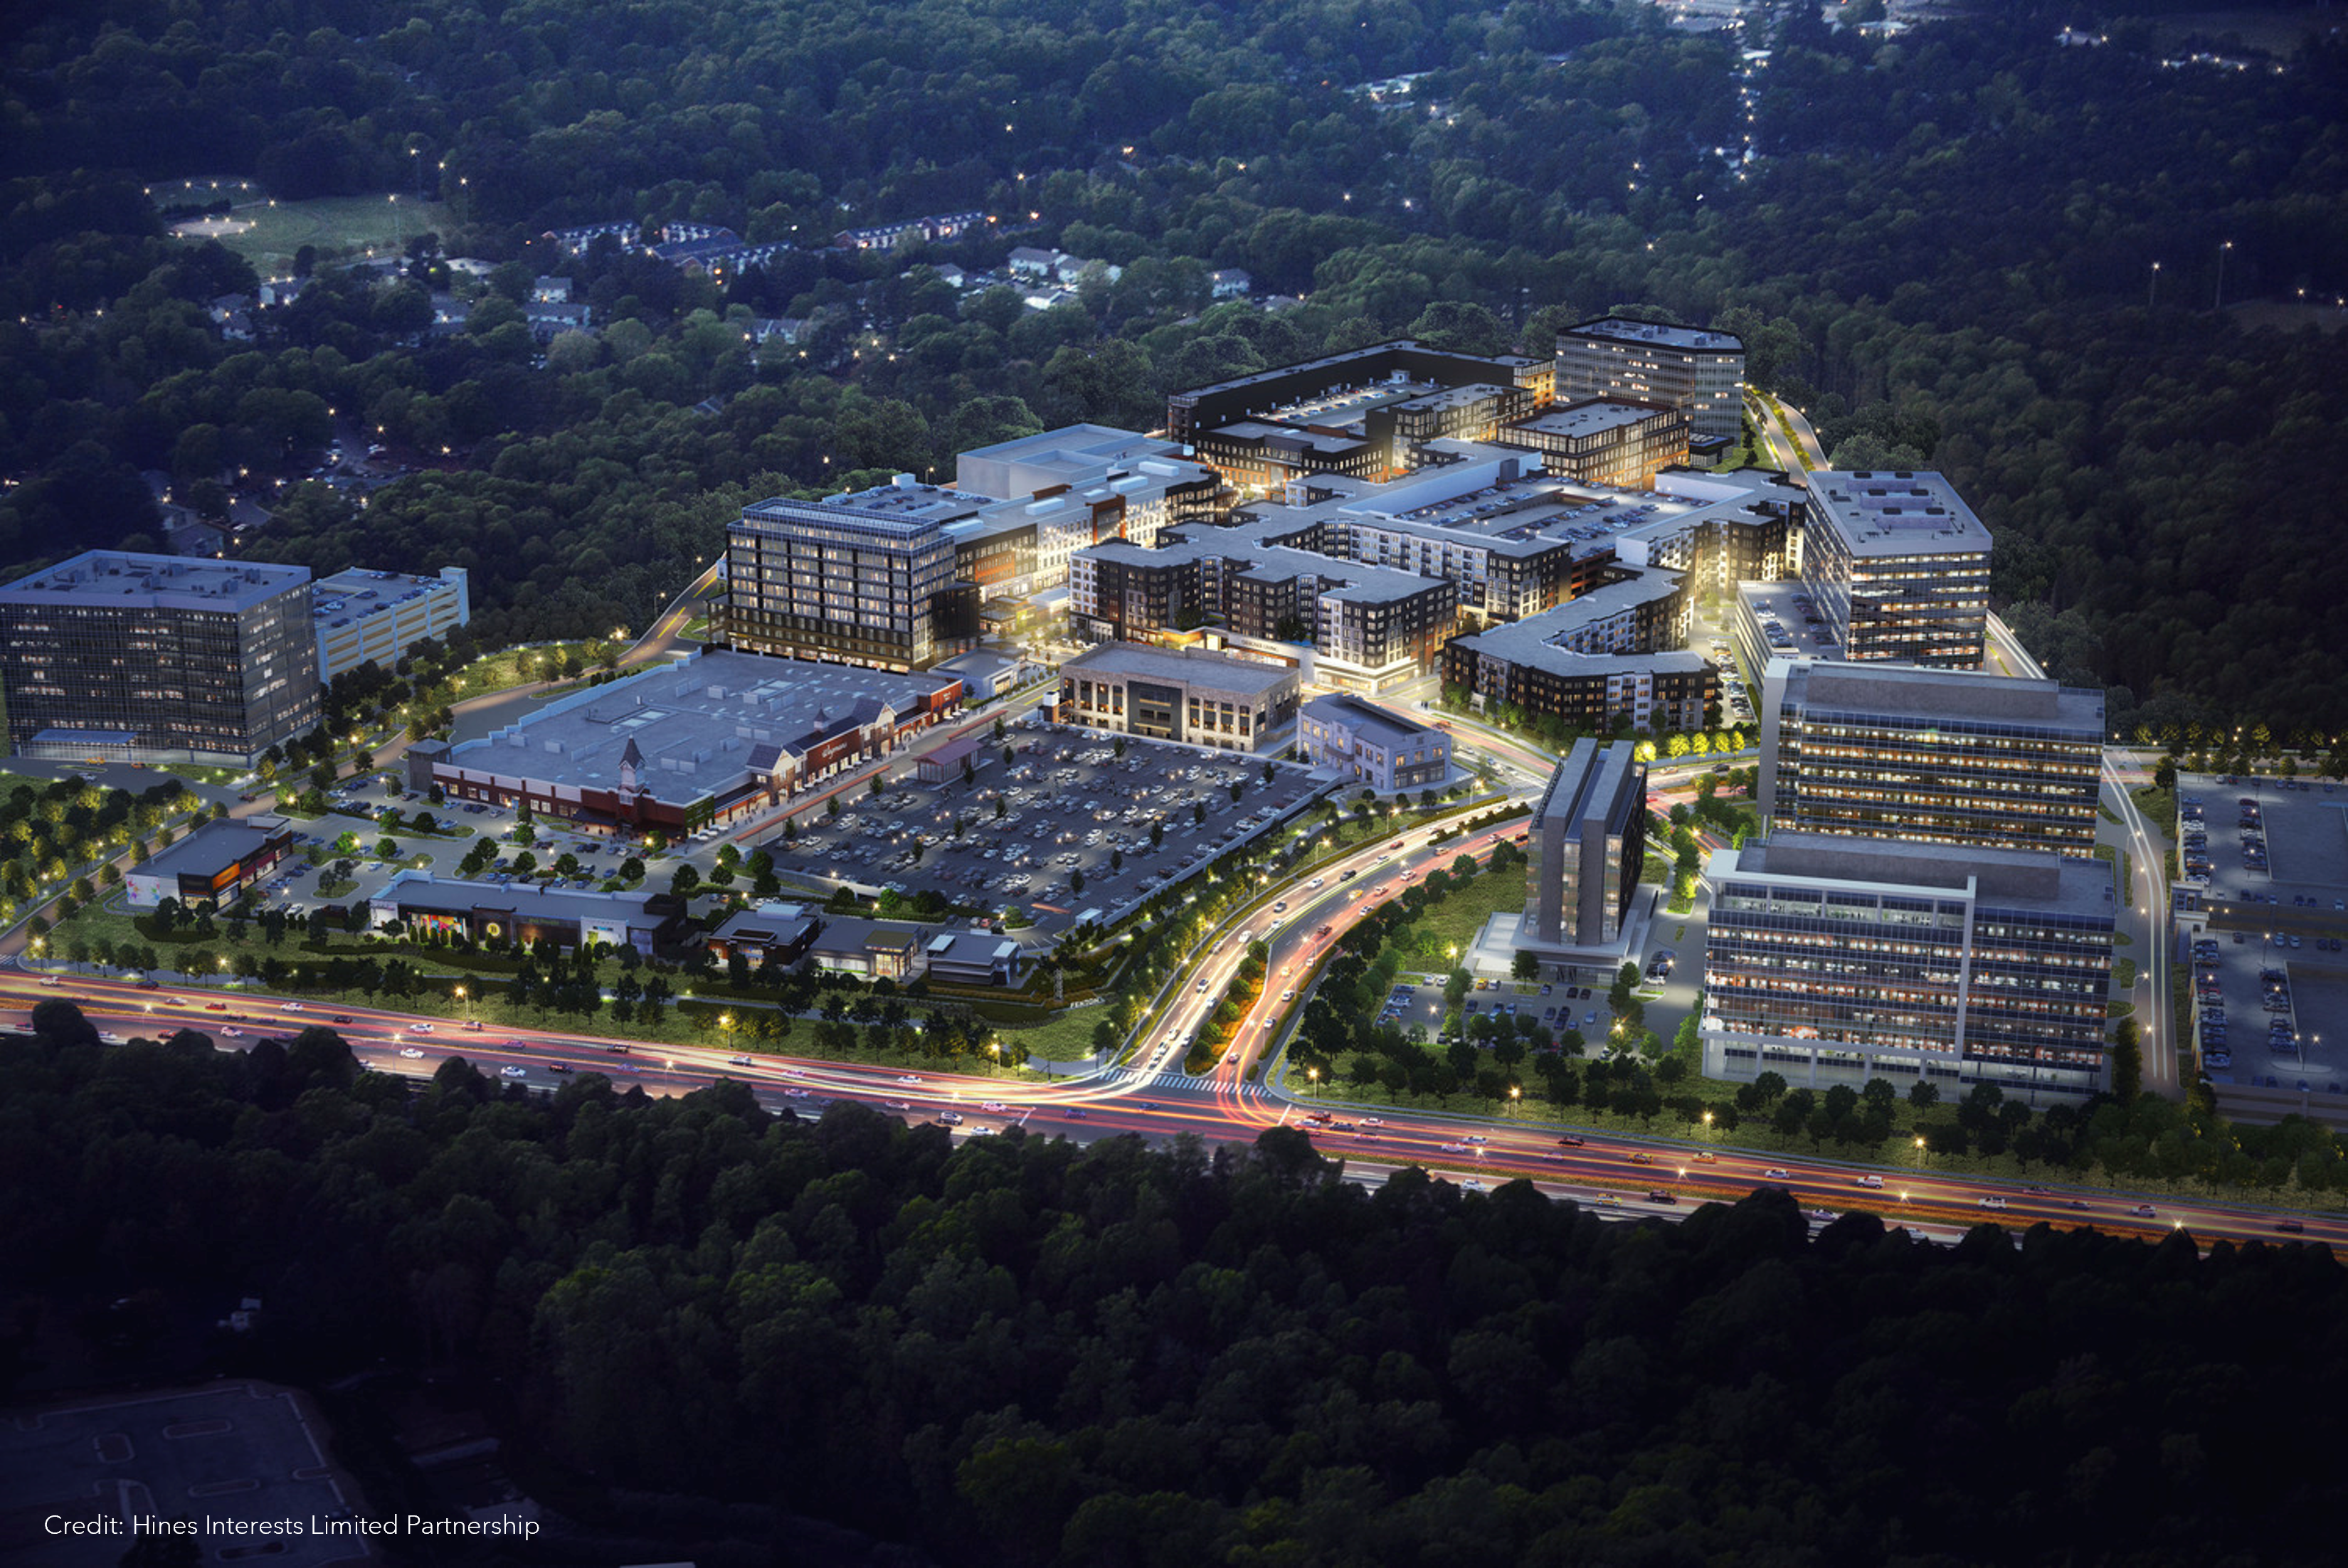 Some of the best real estate projects incorporate all product types like Fenton in Cary, North Carolina, which is the area’s first mixed-use destination.